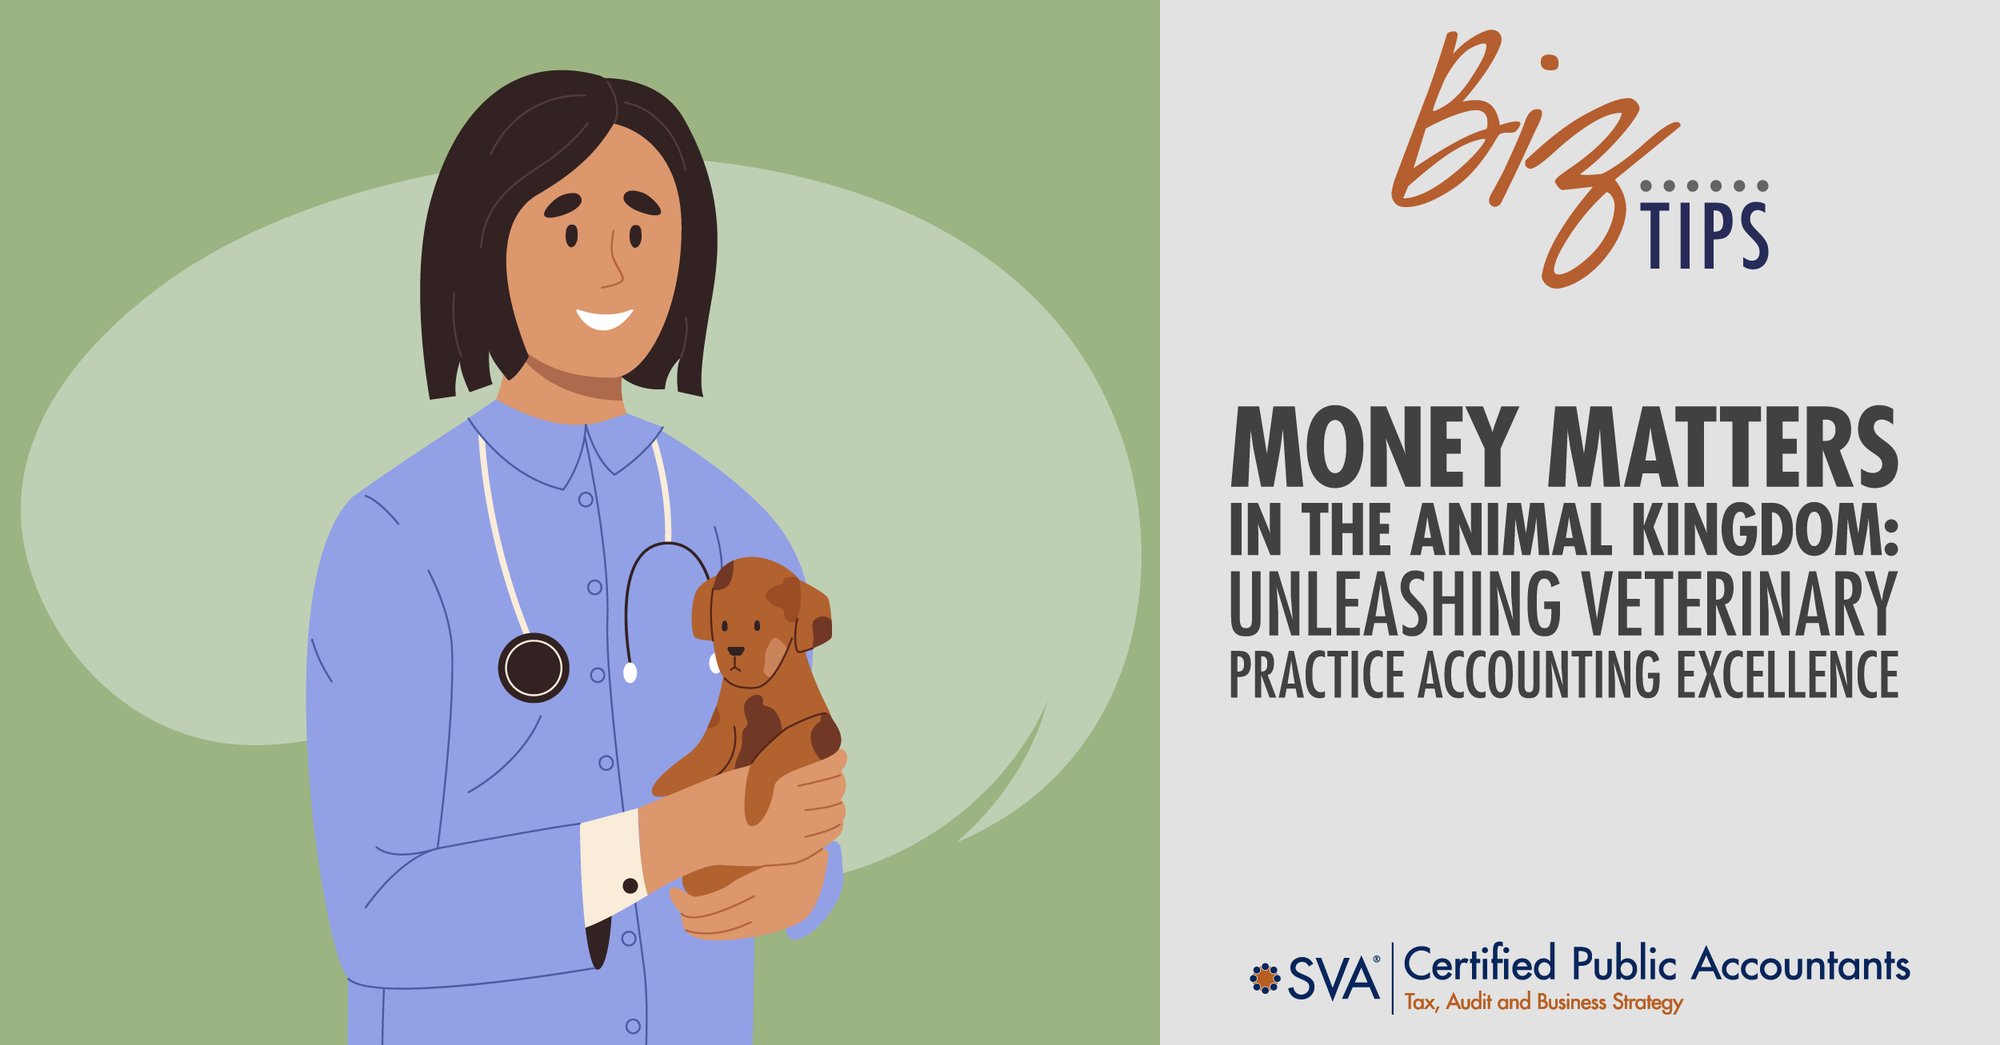 sva-certified-public-accountants-biz-tips-money-matters-in-the-animal-kingdom-unleashing-verterinary-practice-accounting-excellence-1